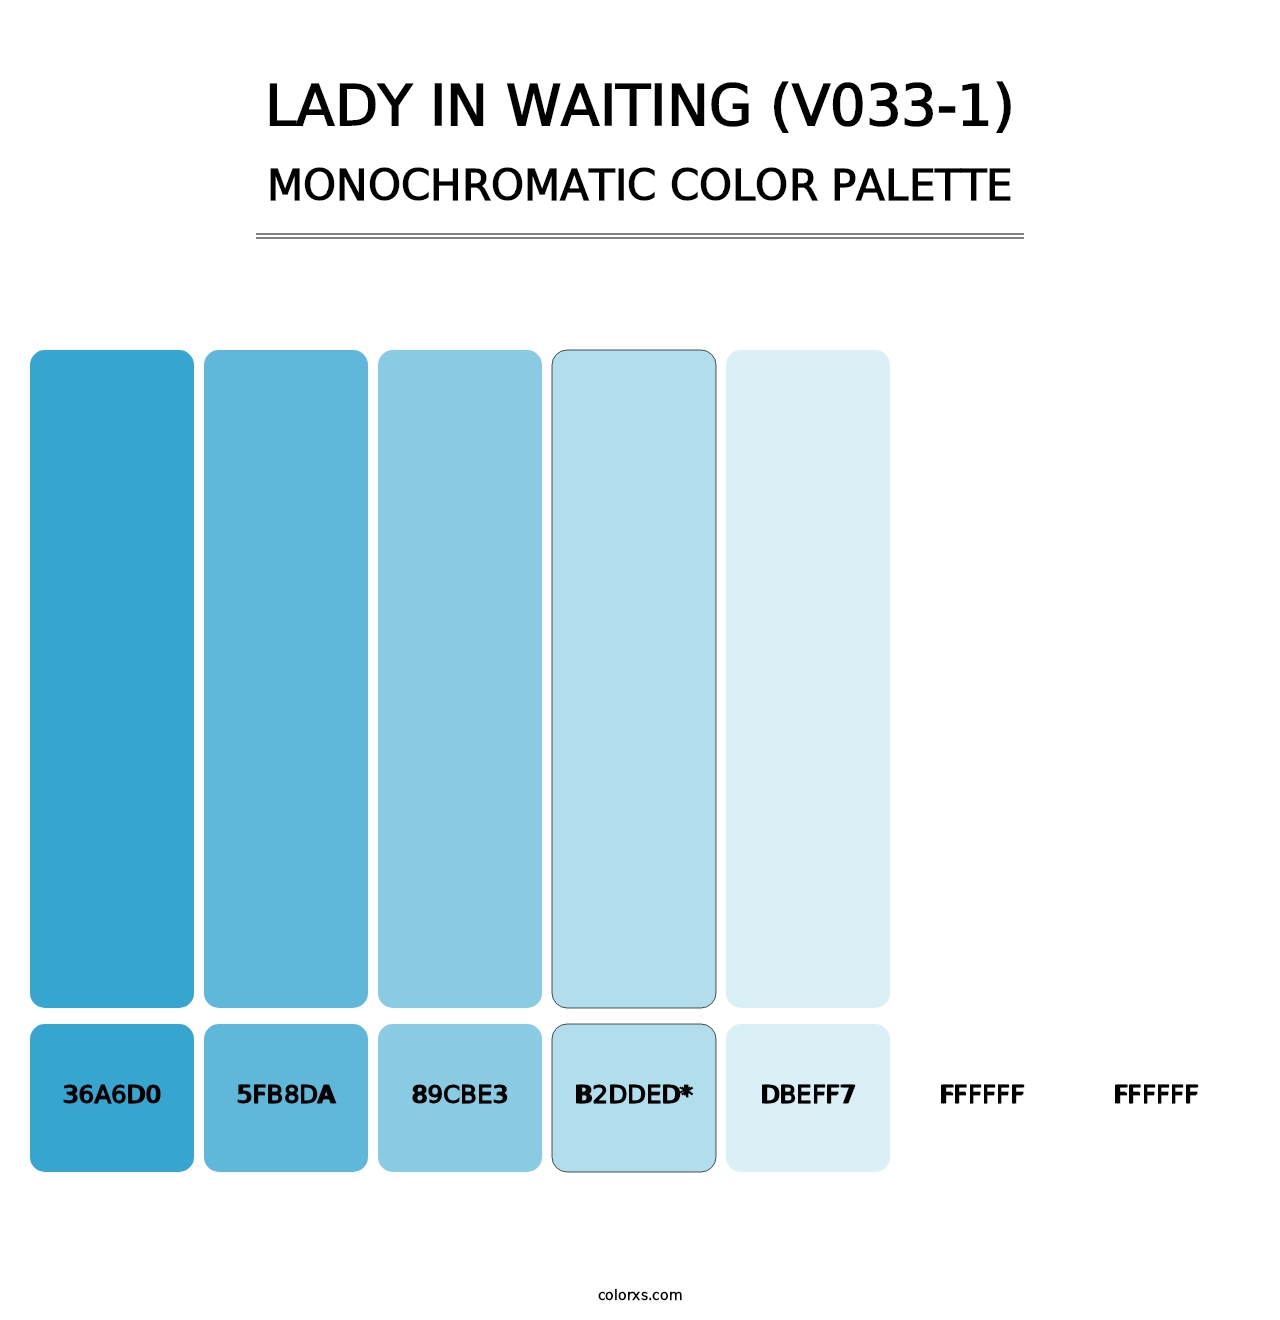 Lady in Waiting (V033-1) - Monochromatic Color Palette